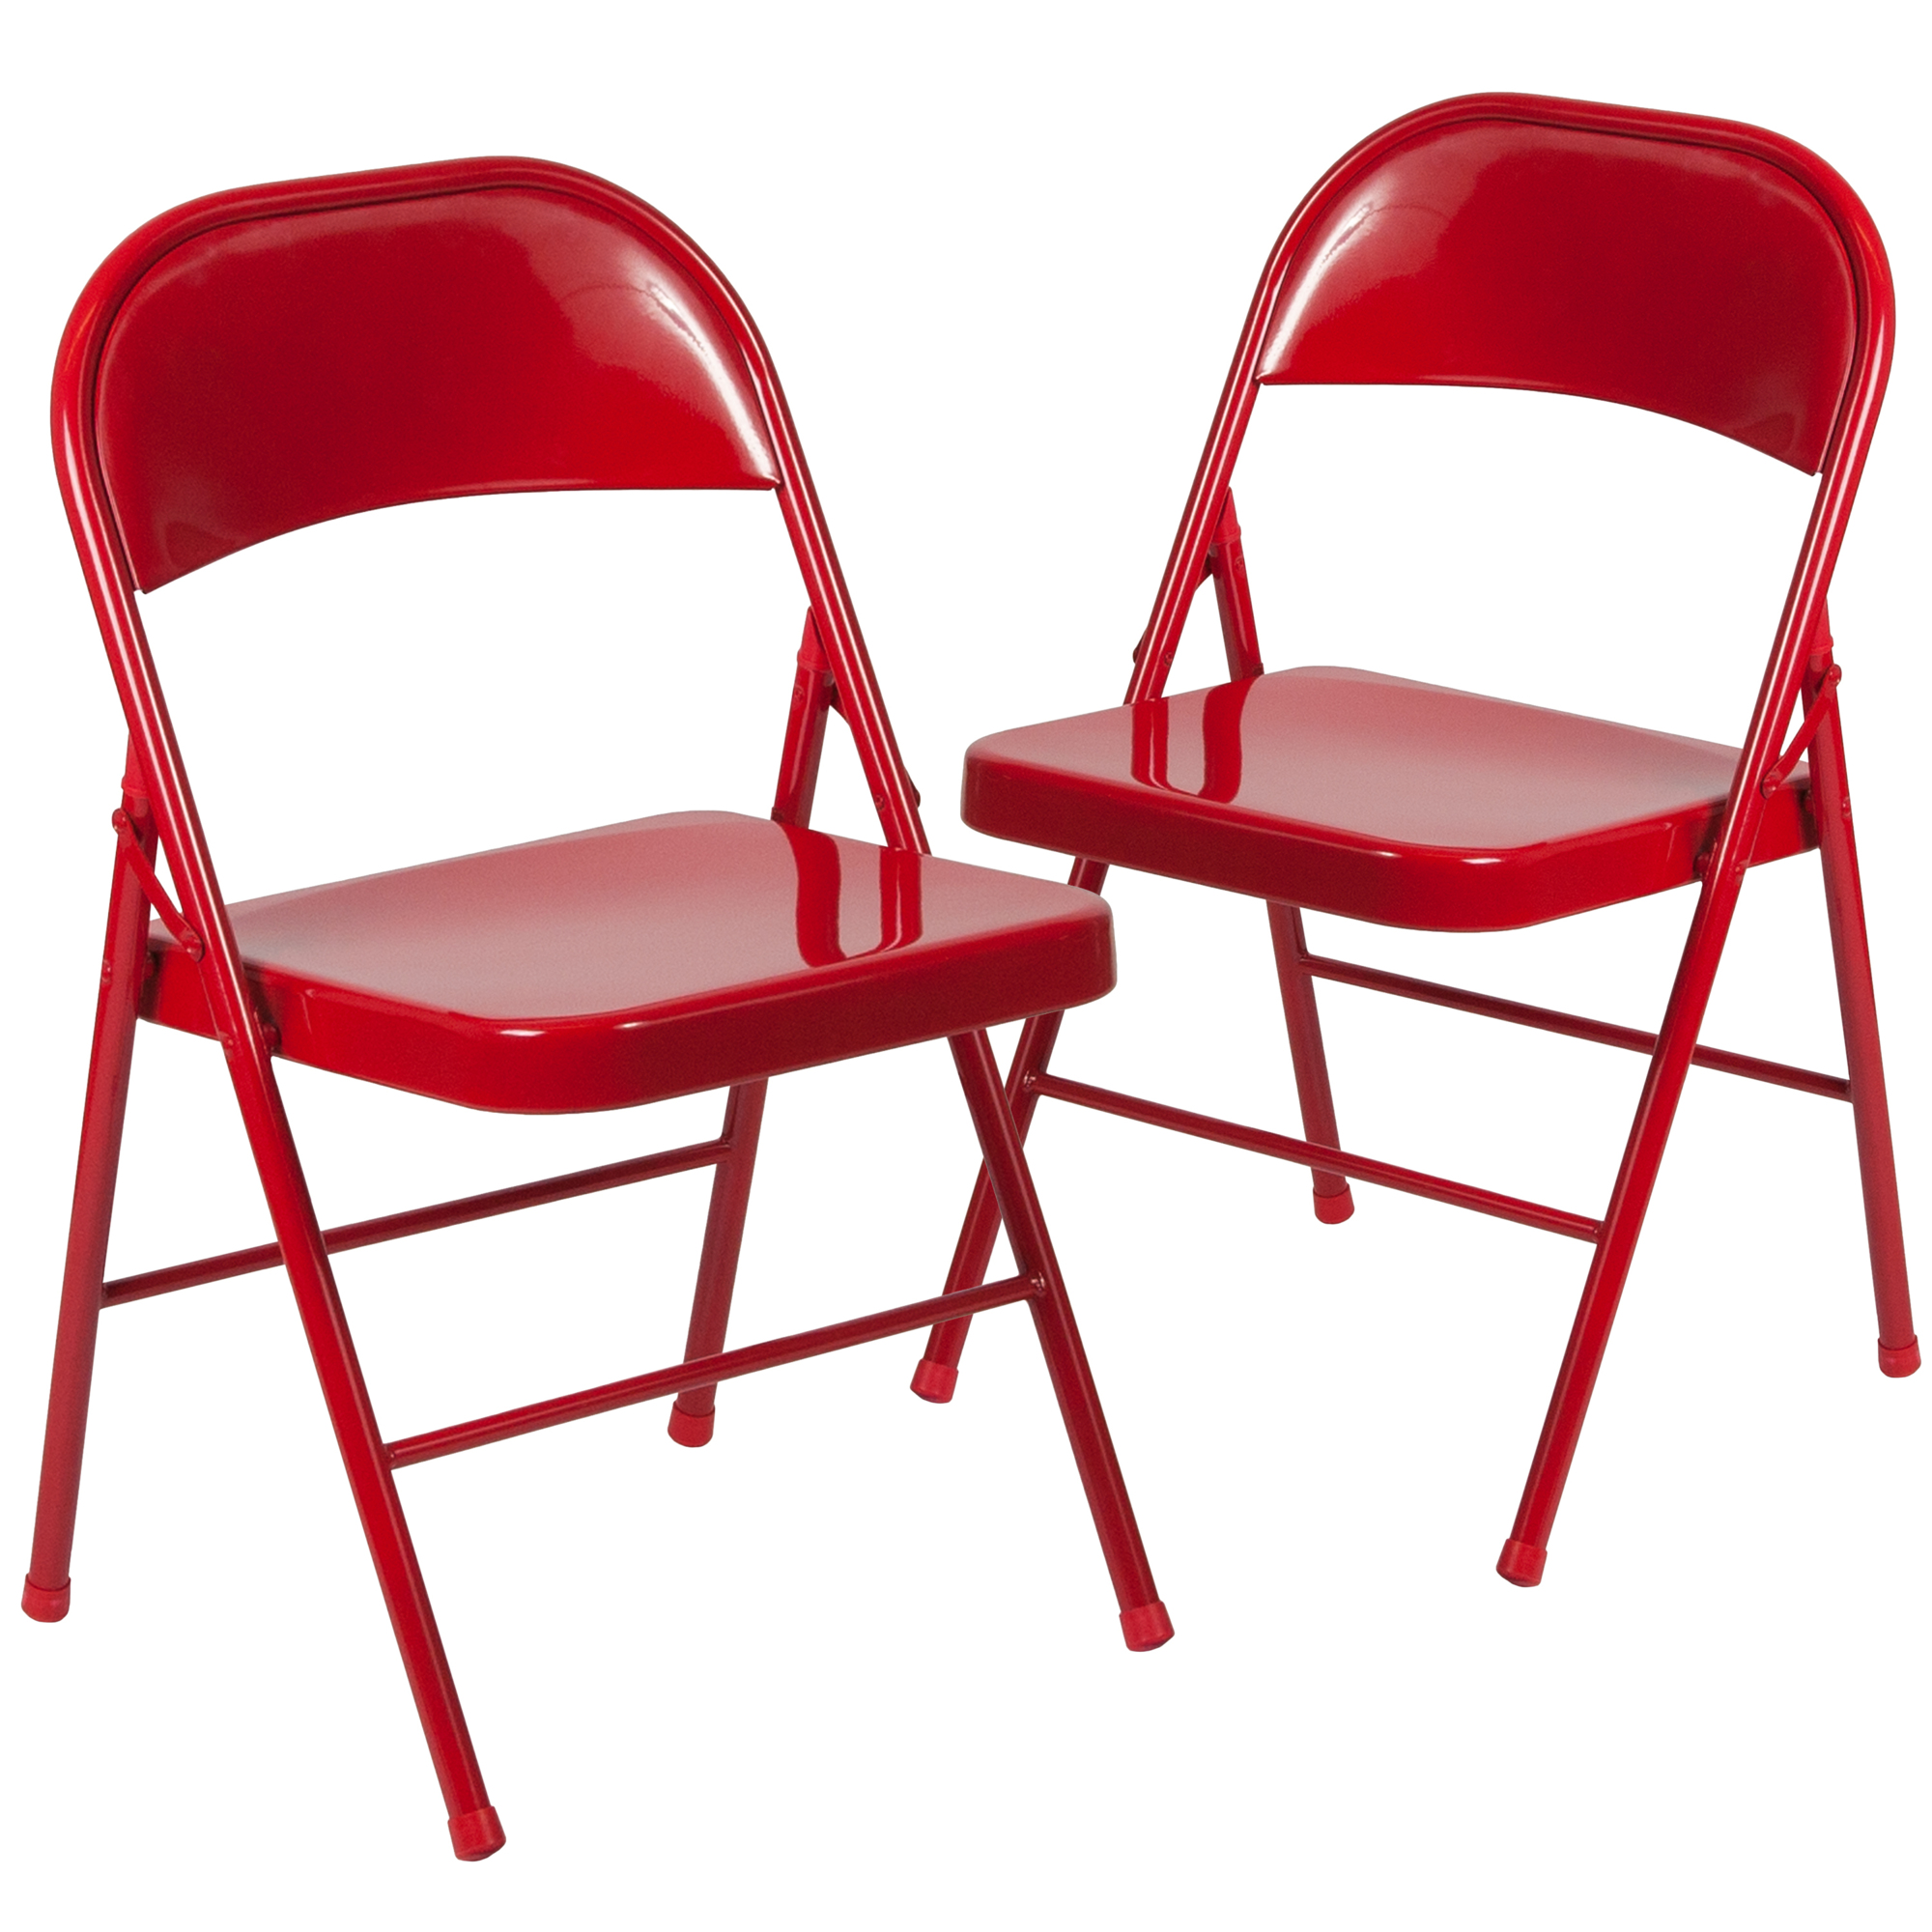 Flash Furniture, 2 Pack Double Braced Red Metal Folding Event Chair, Primary Color Red, Included (qty.) 2, Model 2BDF002RED